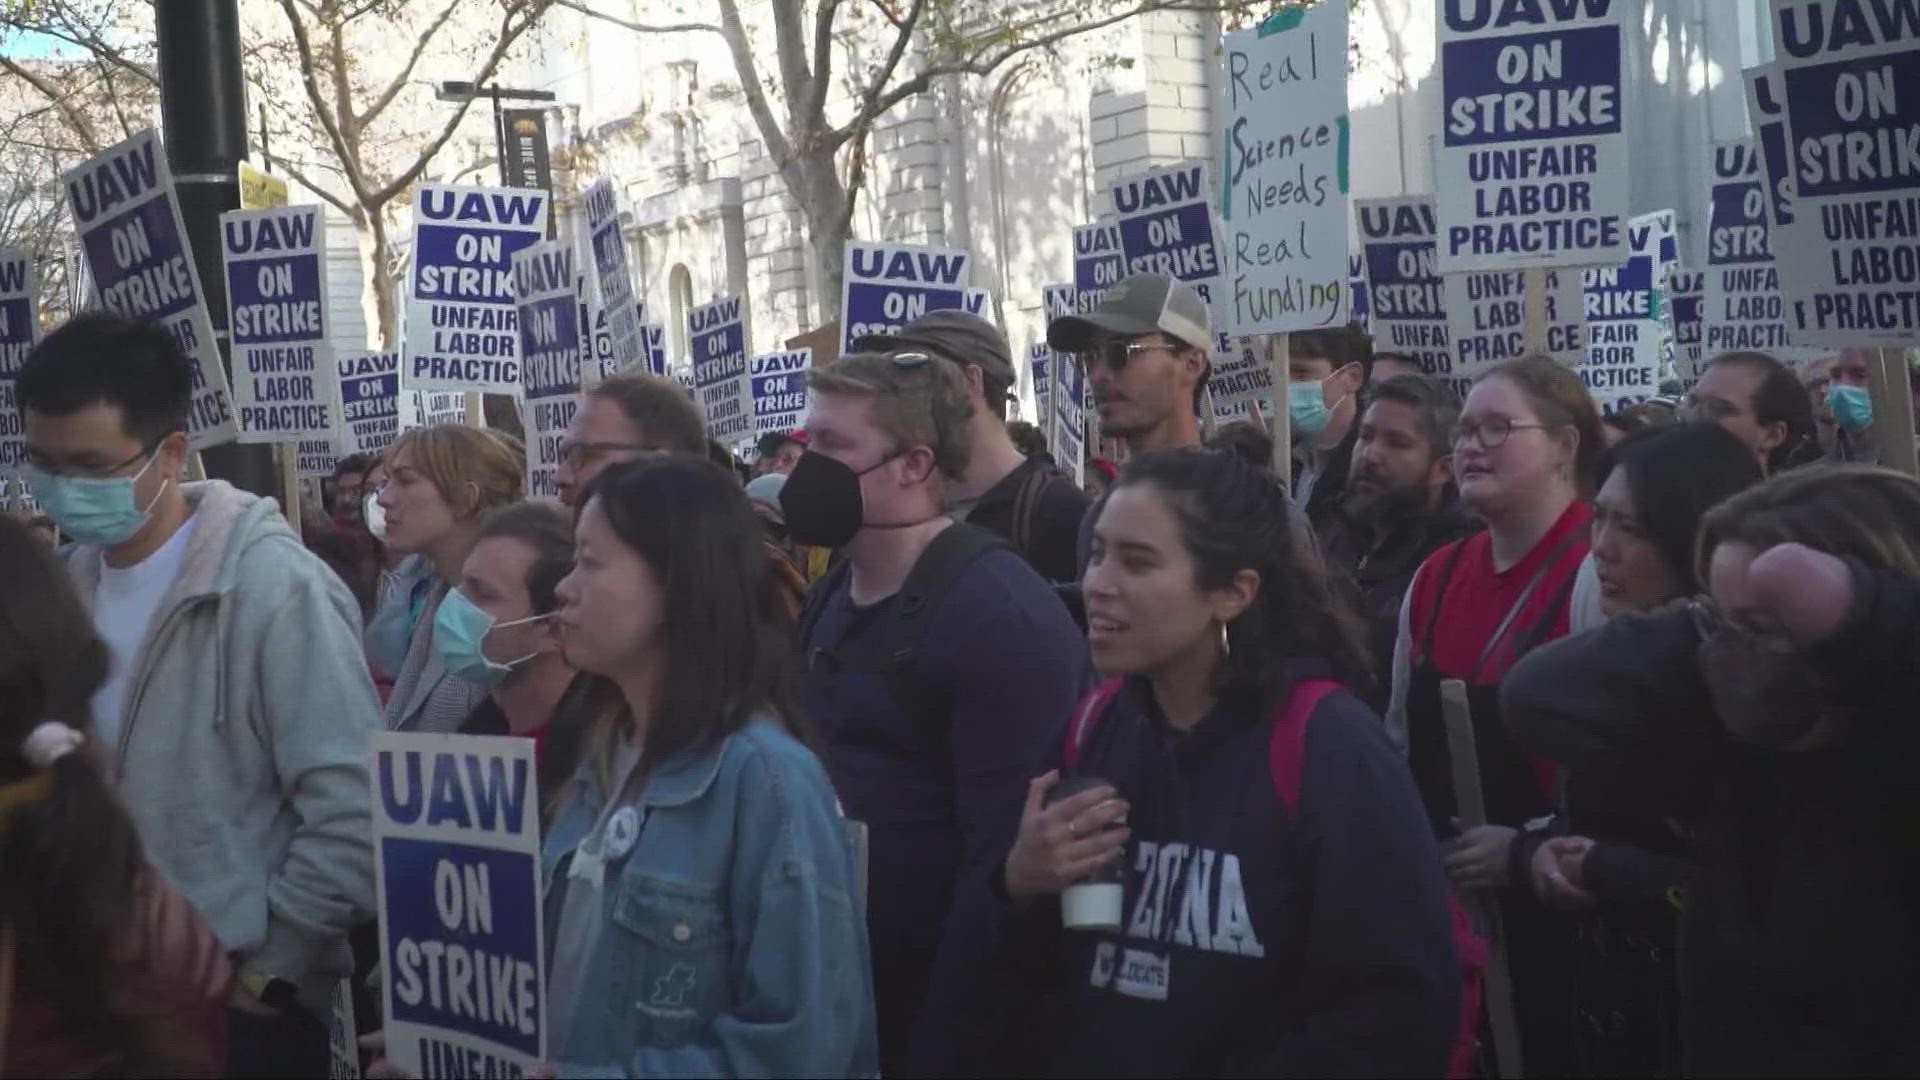 Hundreds of University of California academic workers marched in Sacramento, demanding better wages and working conditions.